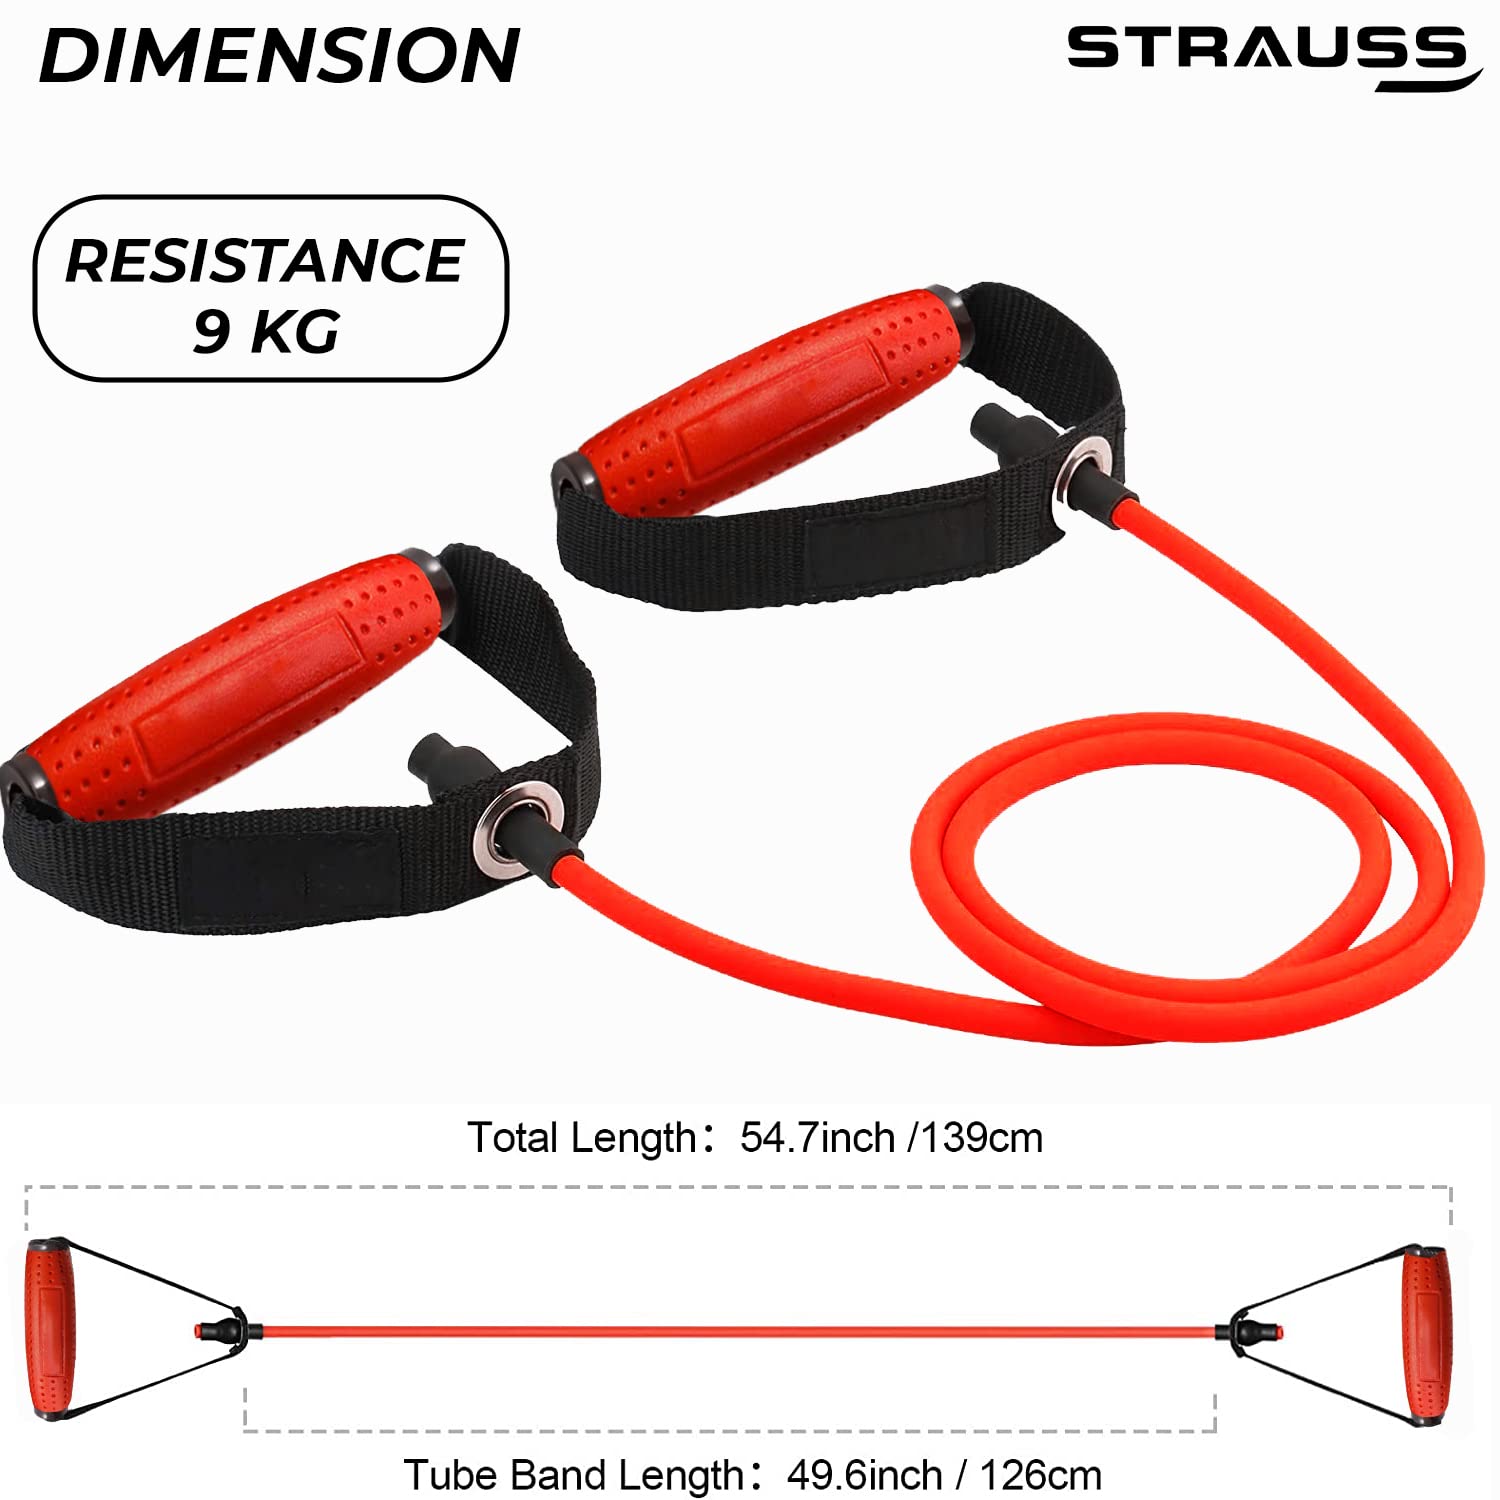 Strauss Single Resistance Tube with PVC Handles, Door Knob & Carry Bag, 9 Kg, (Red)